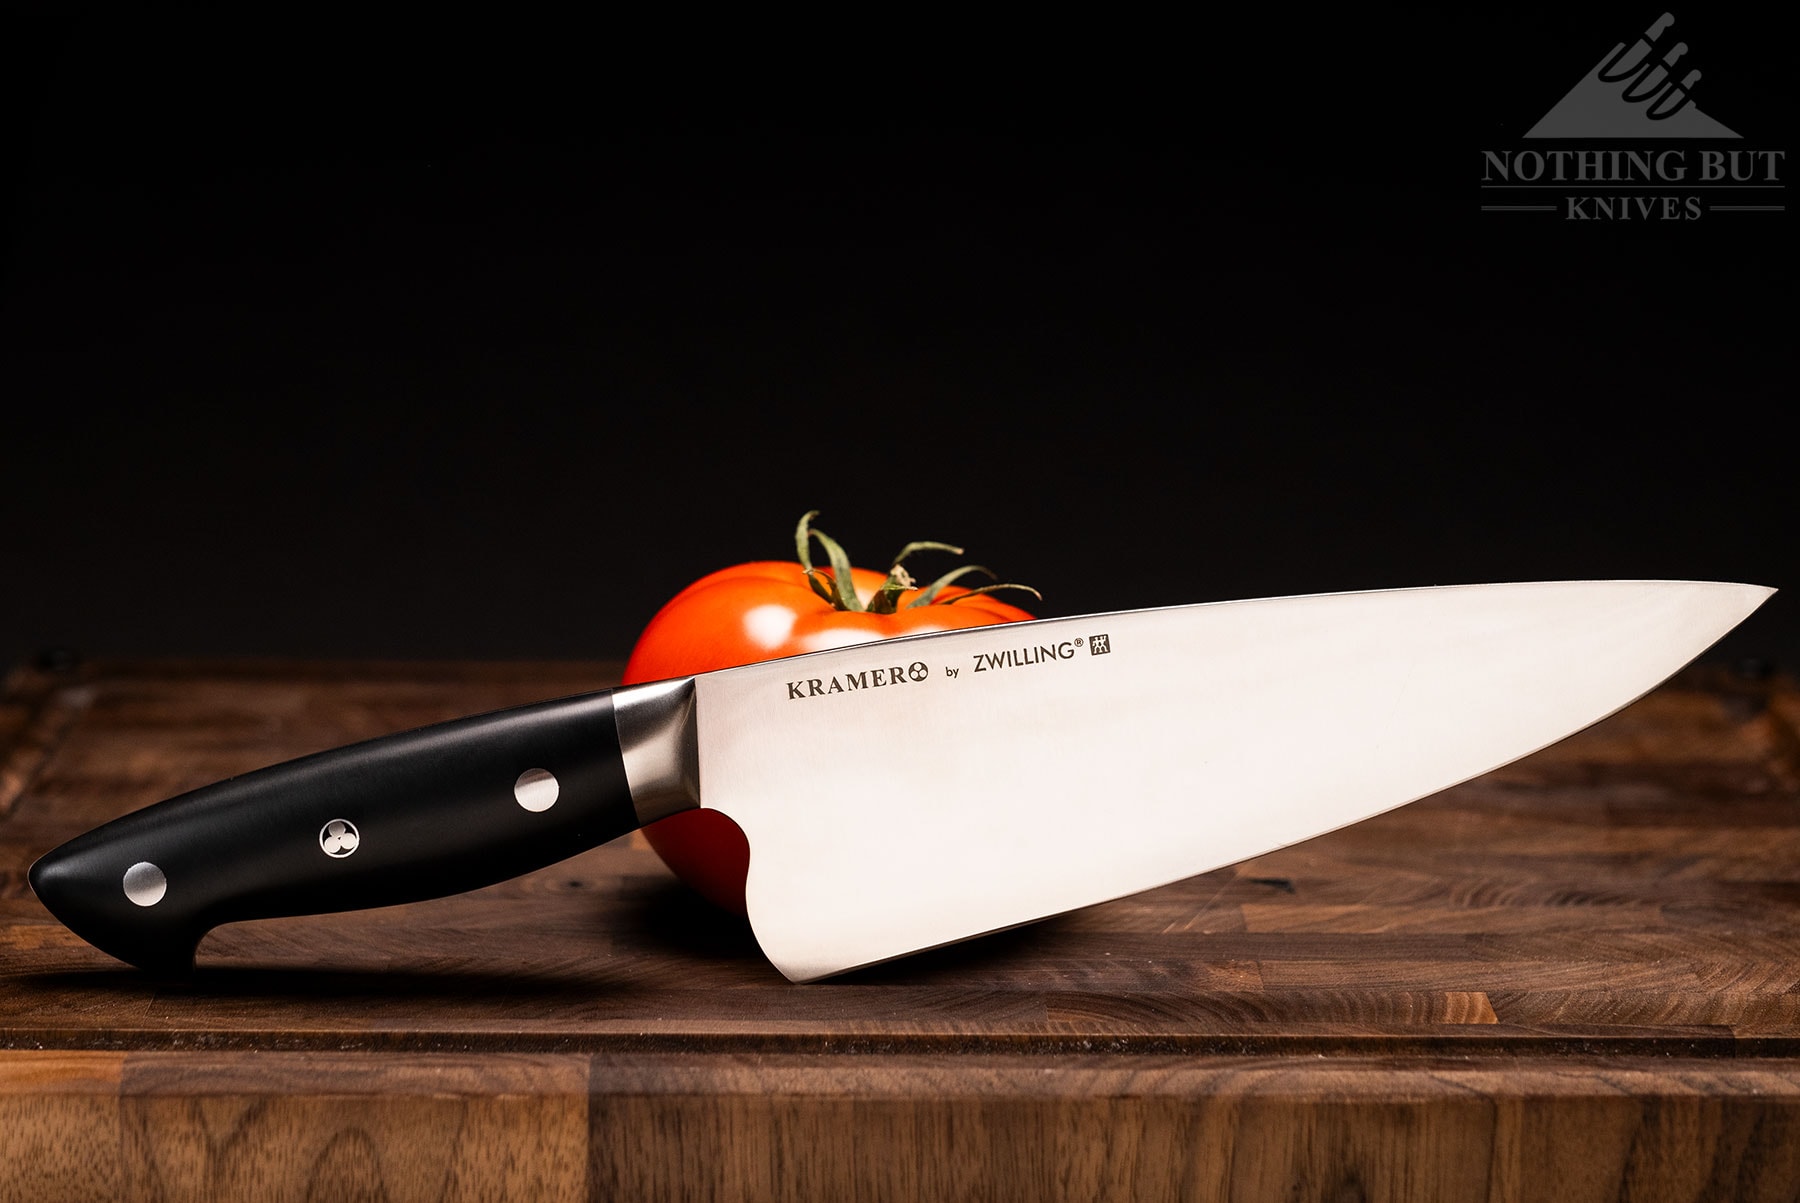 The Kramer By Zwilling Essentials Collection chef knife leaning against a ripe tomato on a wood cutting board.